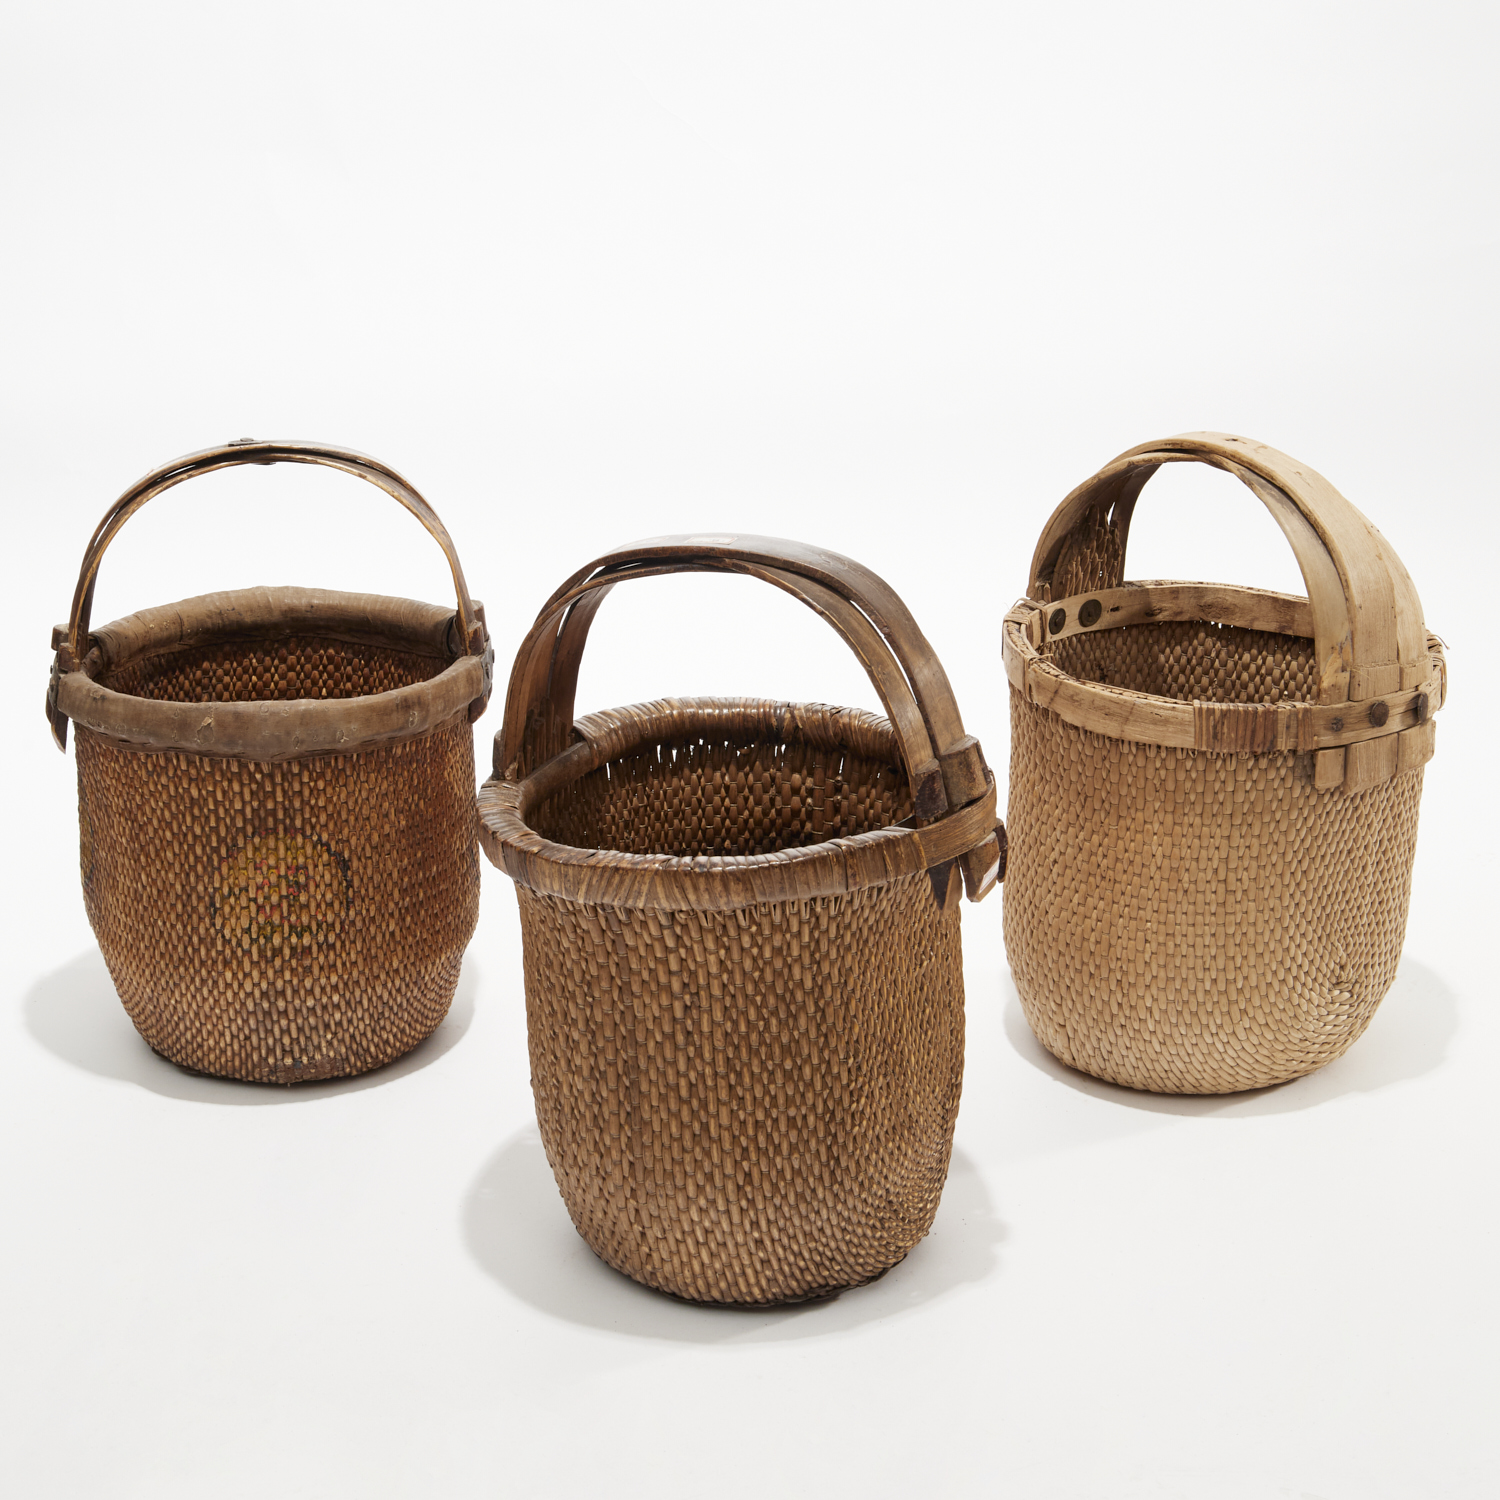 (3) CHINESE WOVEN FISHERMANS BASKETS